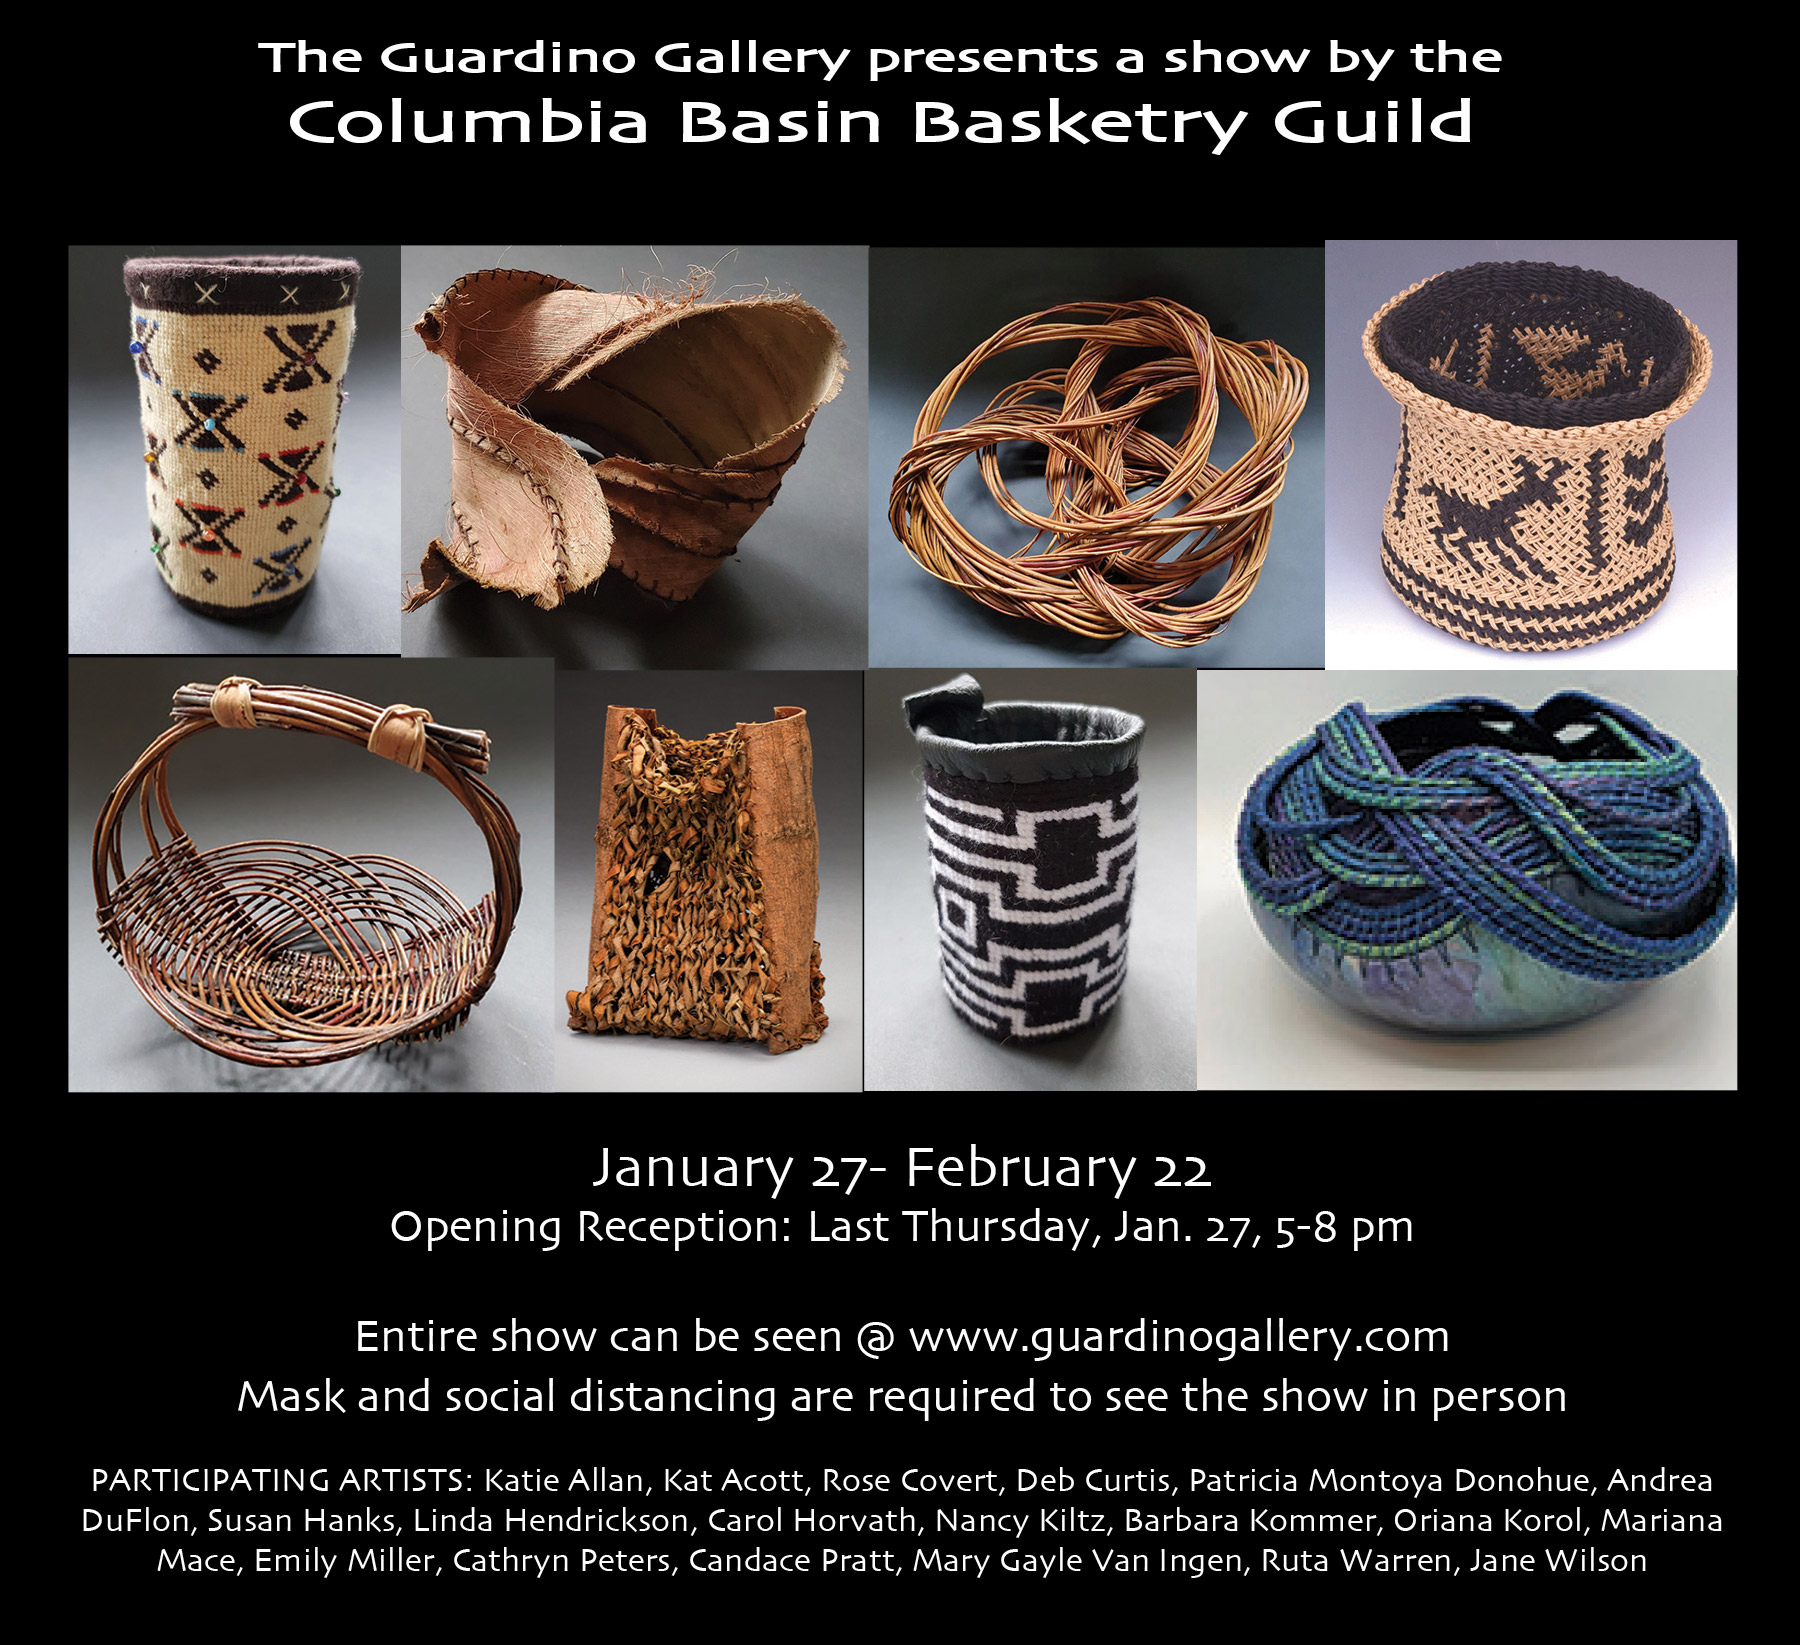 The Guardino Gallery Presents a Show by the Columbia Basin Basketry Guild